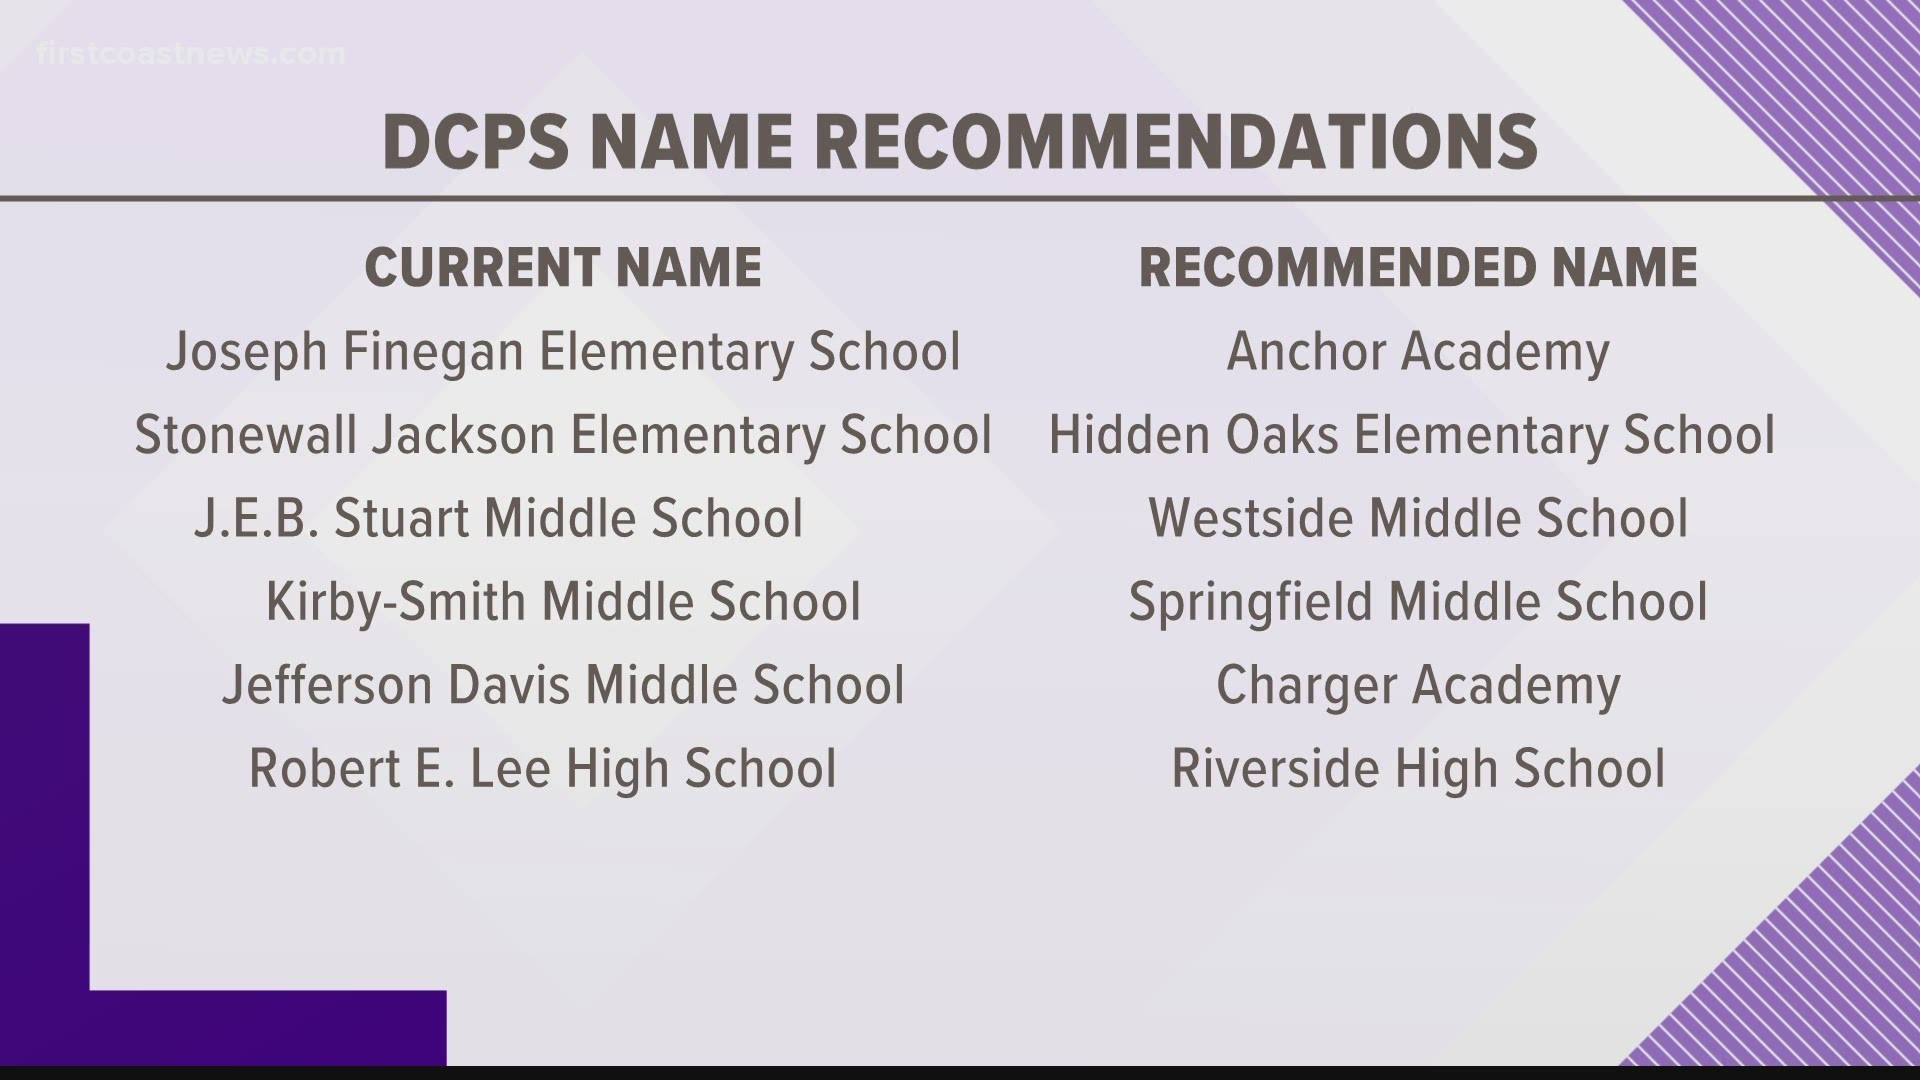 Activist groups urged Duval County Schools to change the names of schools that are named after controversial historic figures such as Confederate leaders.